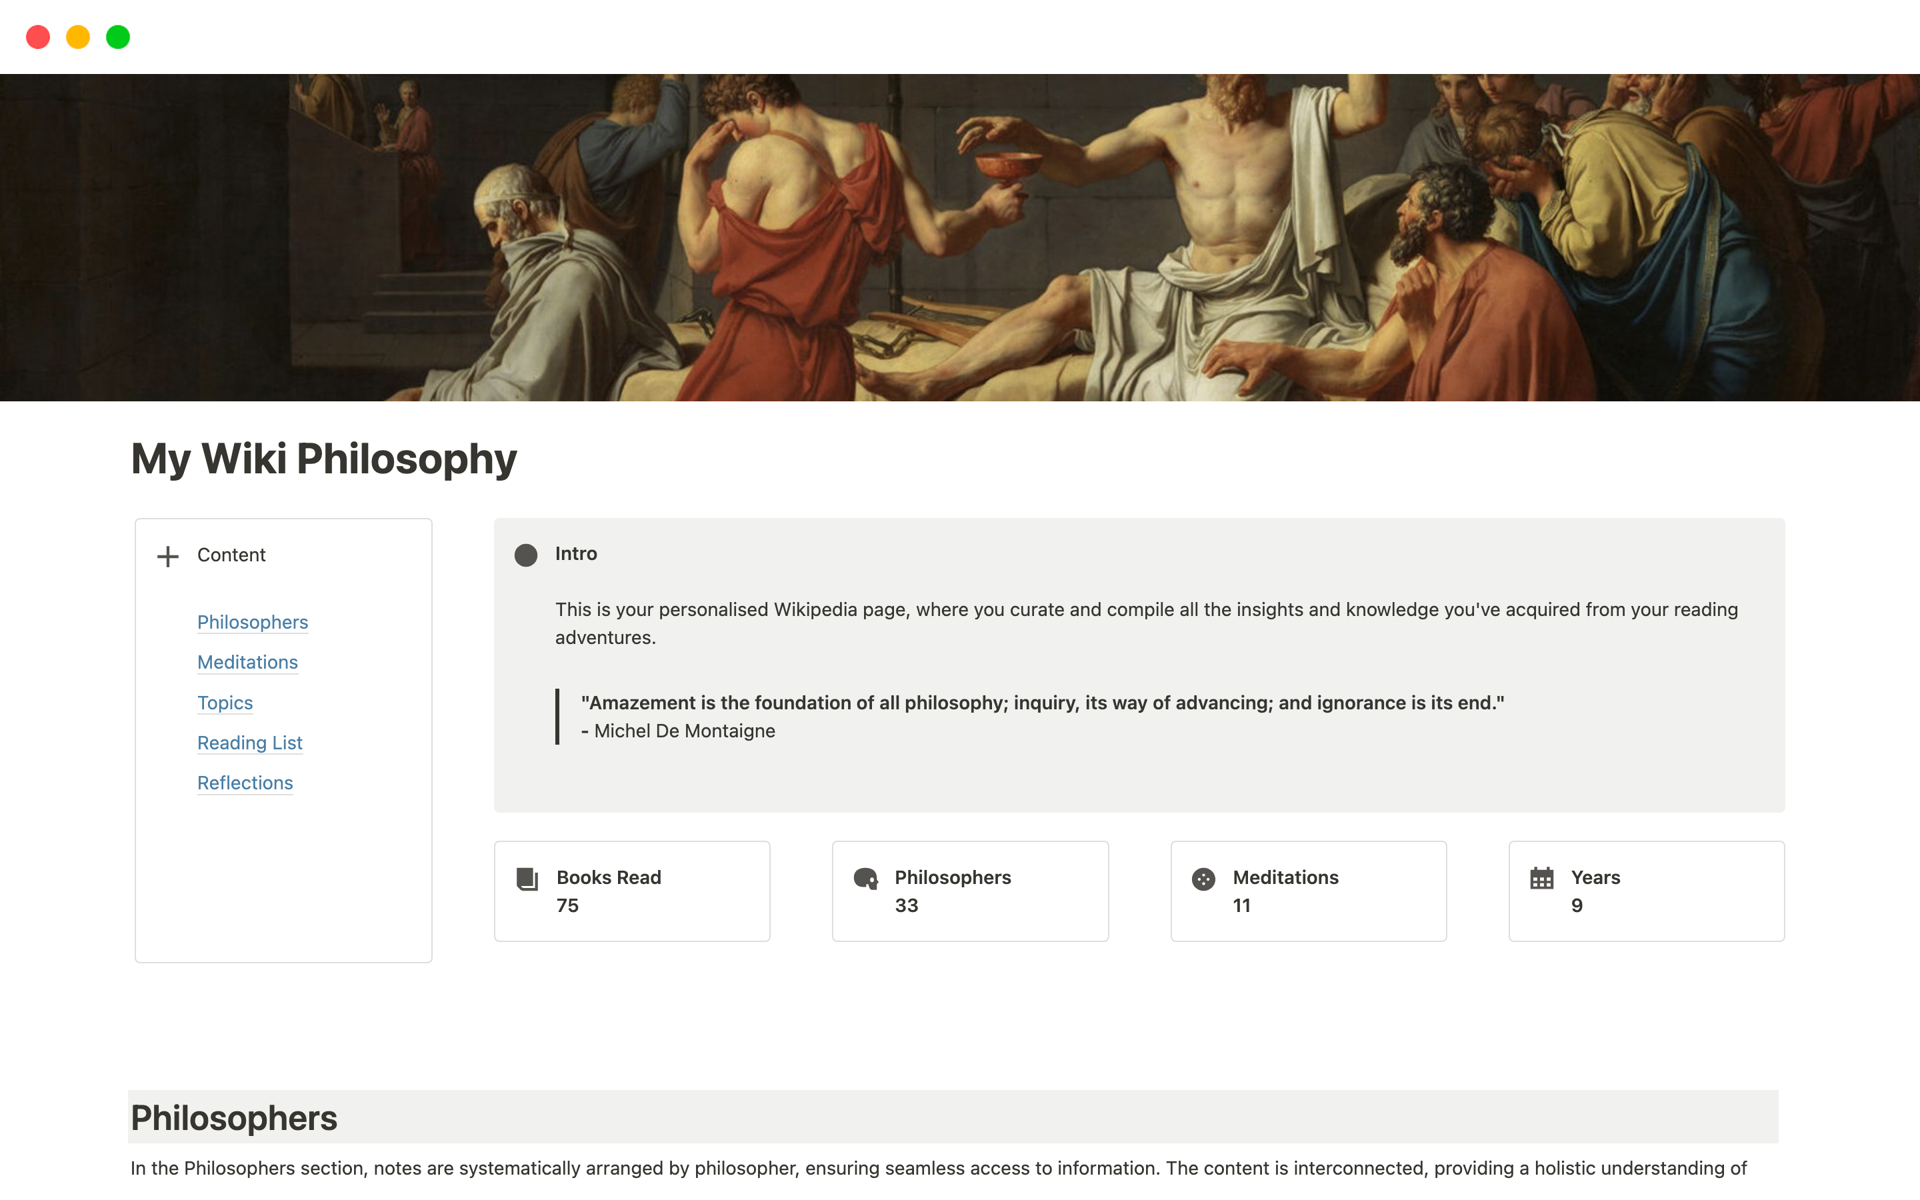 Dive into a curated philosophical journey with the "My Wiki Philosophy" Notion template, encompassing 9 years of study, insights from 33 philosophers, and reflections from 75 pivotal reads.